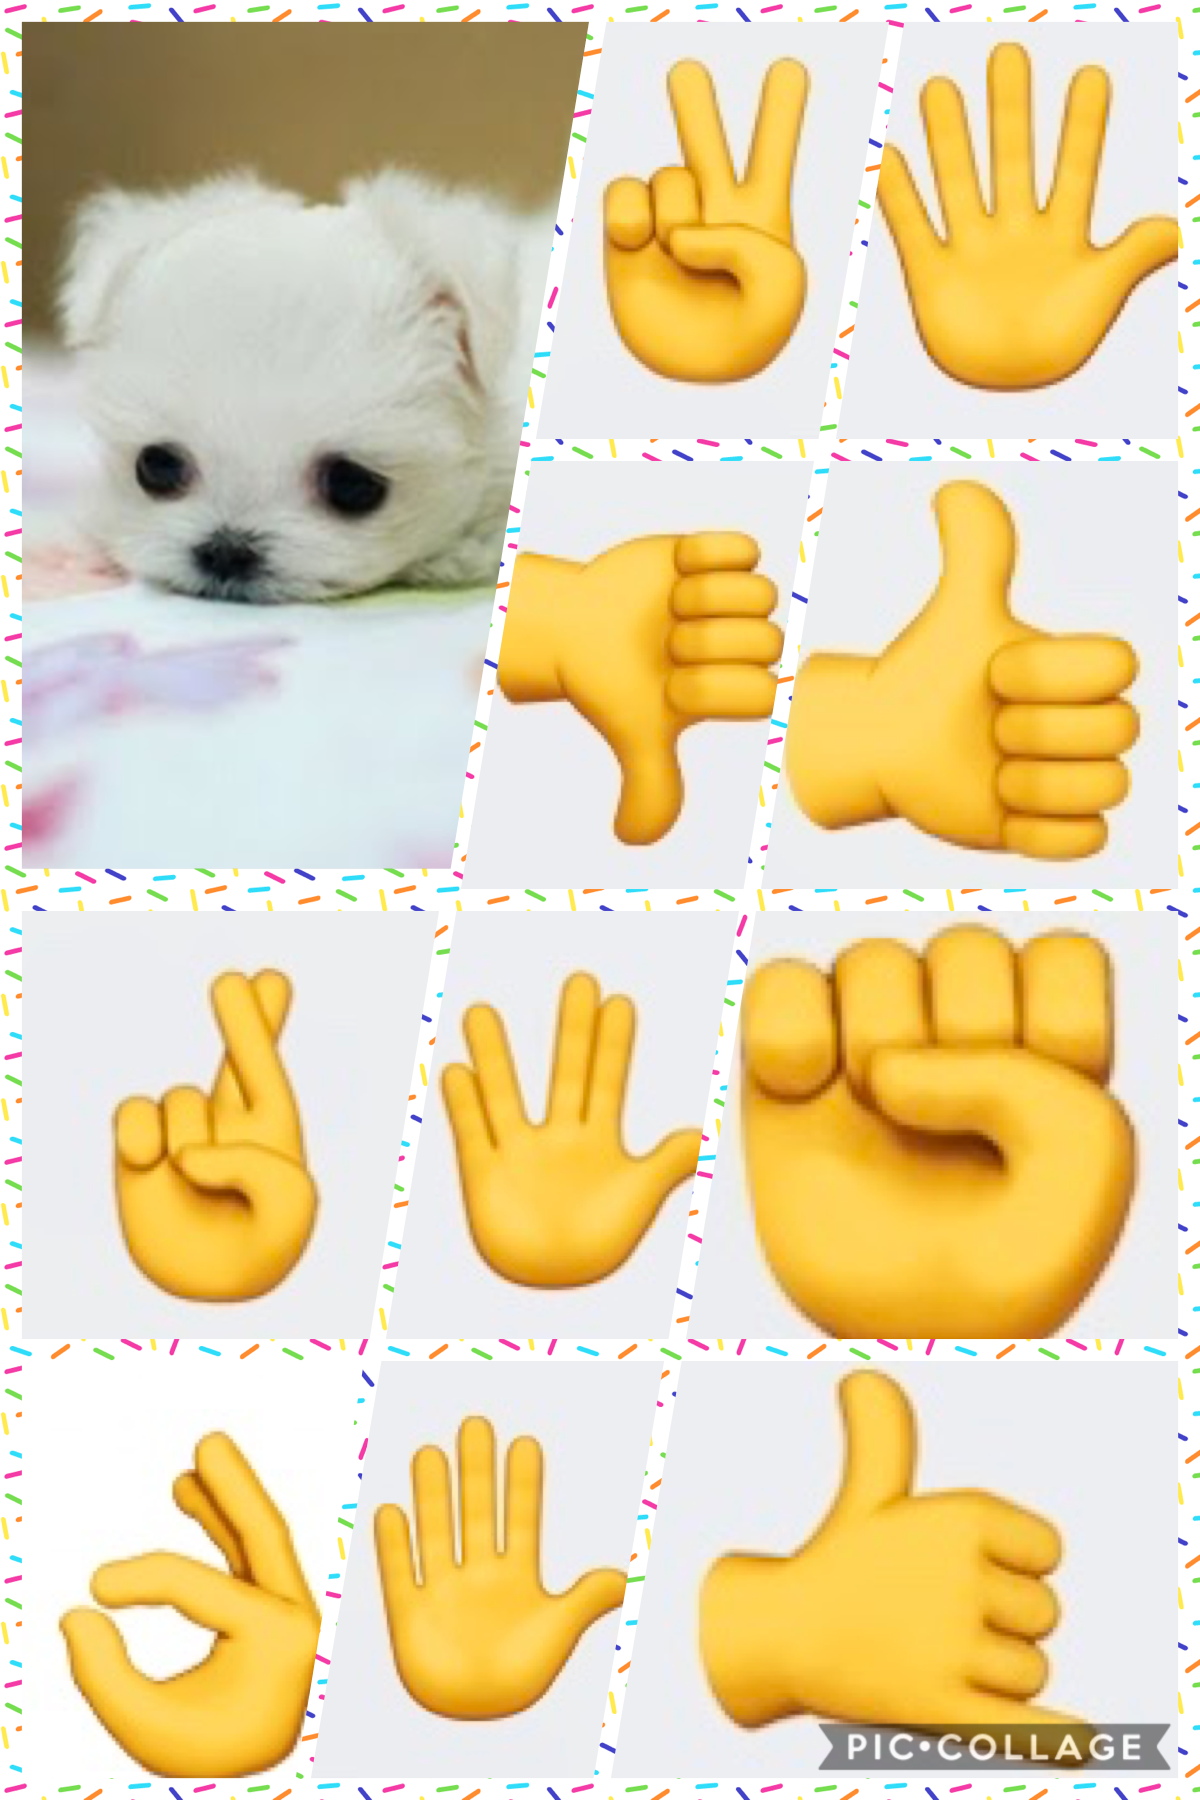 I love hand signs and cute tiny dogs!